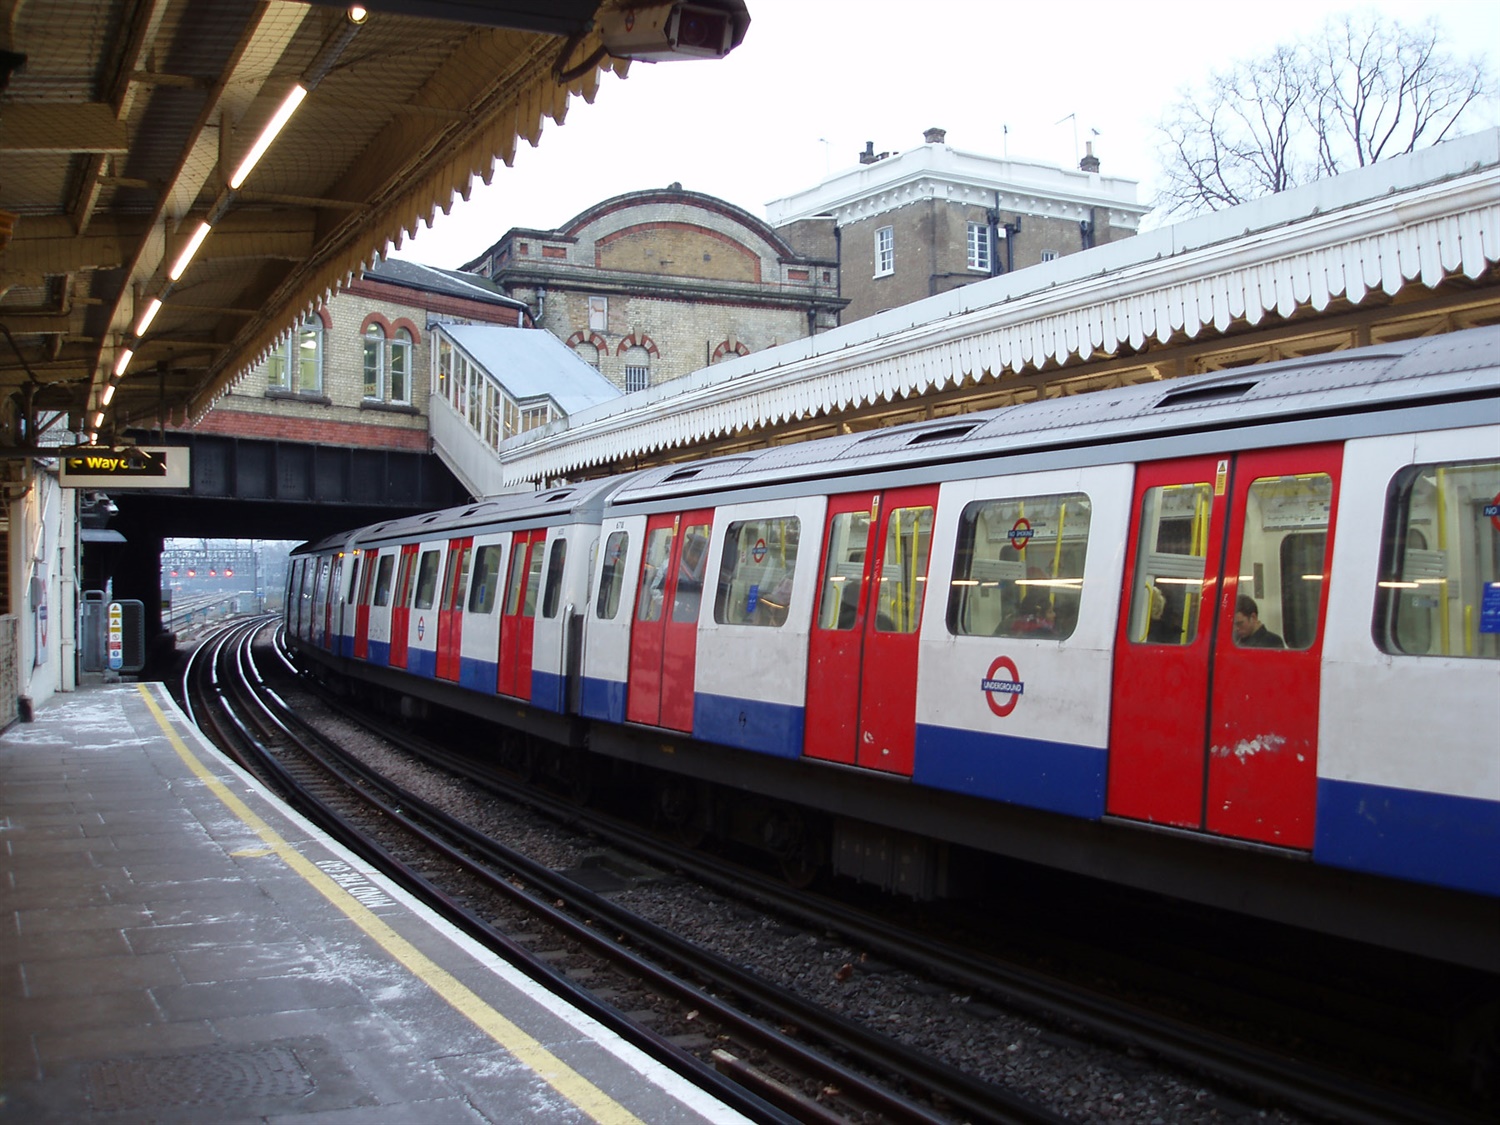 Track engineers take advantage of Tube strike to get work done in daytime